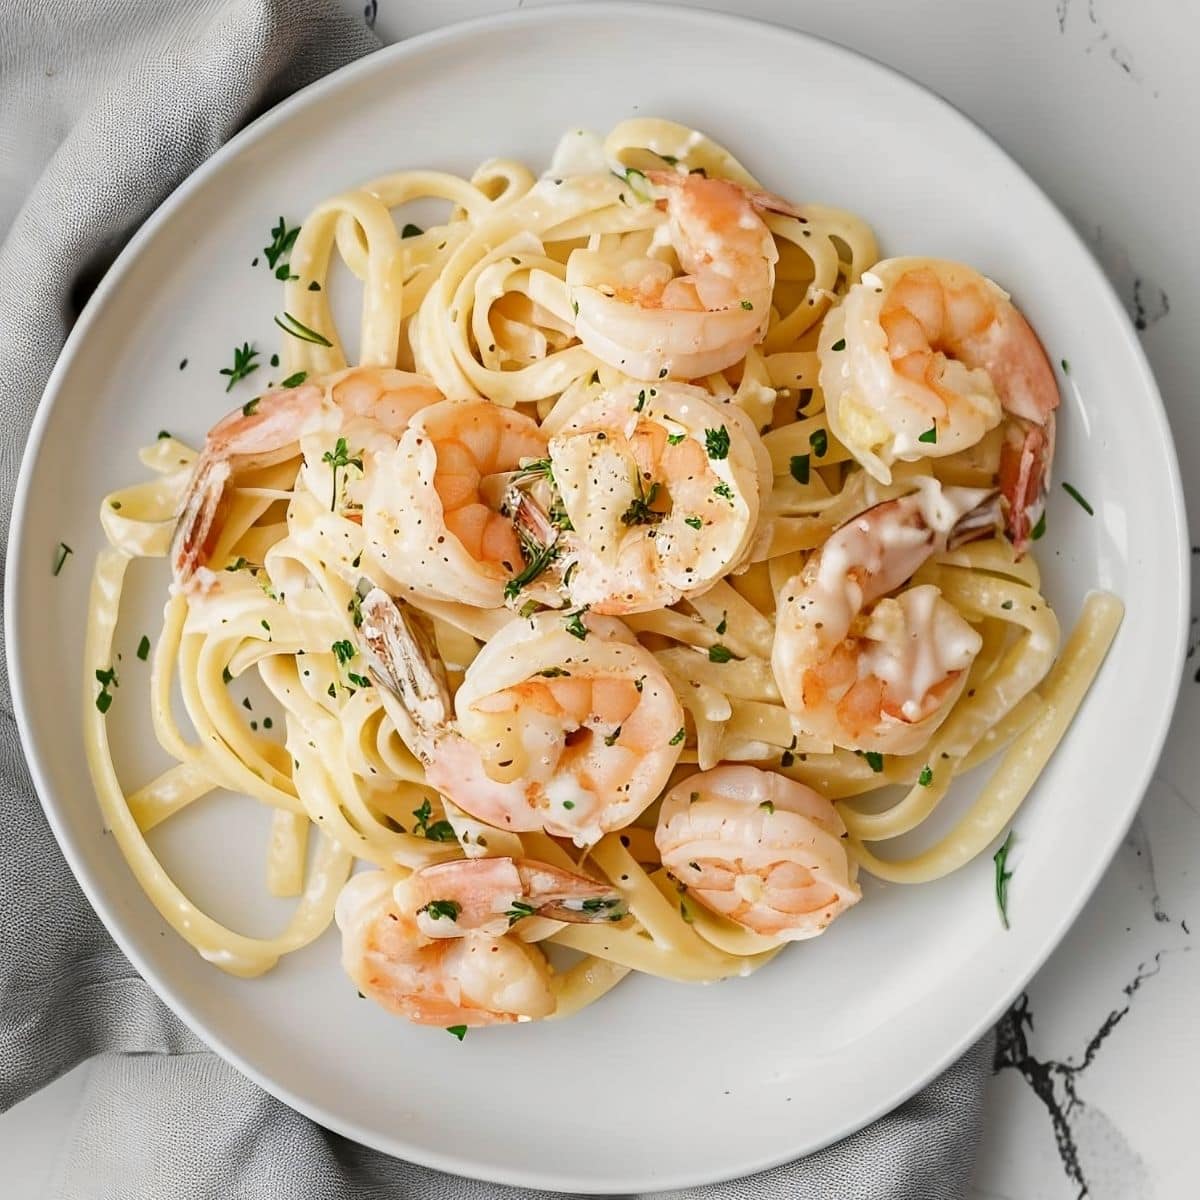 Top View of a Serving of Shrimp Alfredo on a White Plate on a White Marble Table